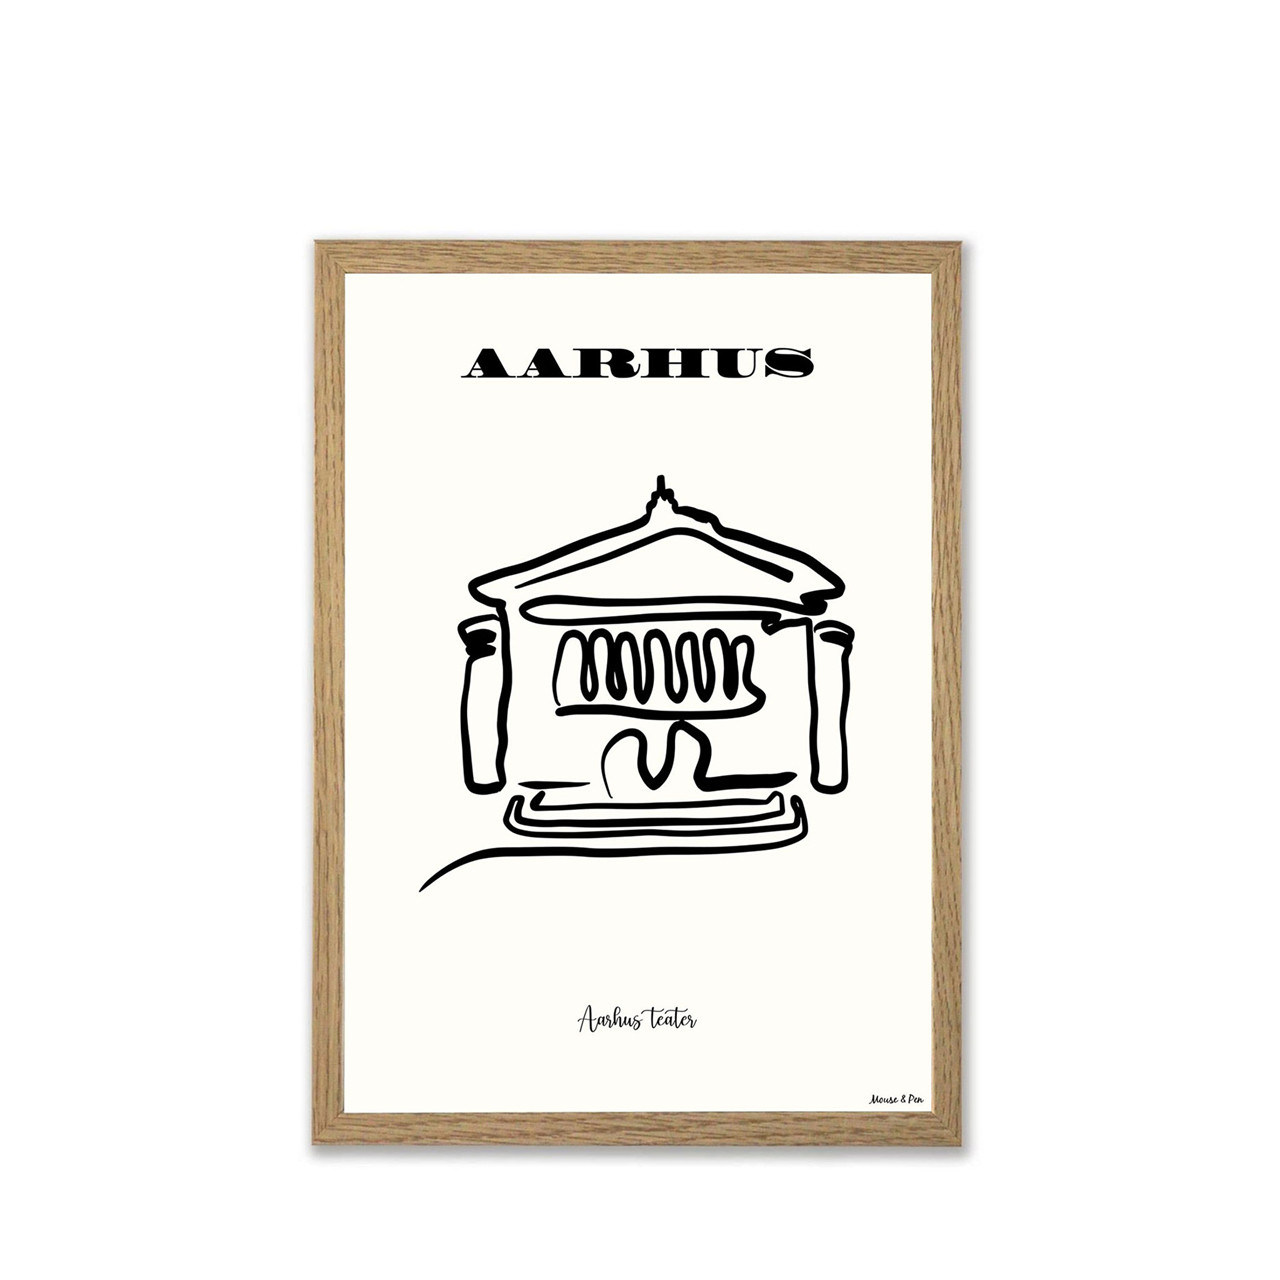 Mouse and Pen Illustration MOUSE AND PEN “Aarhus teater” Plakat A4